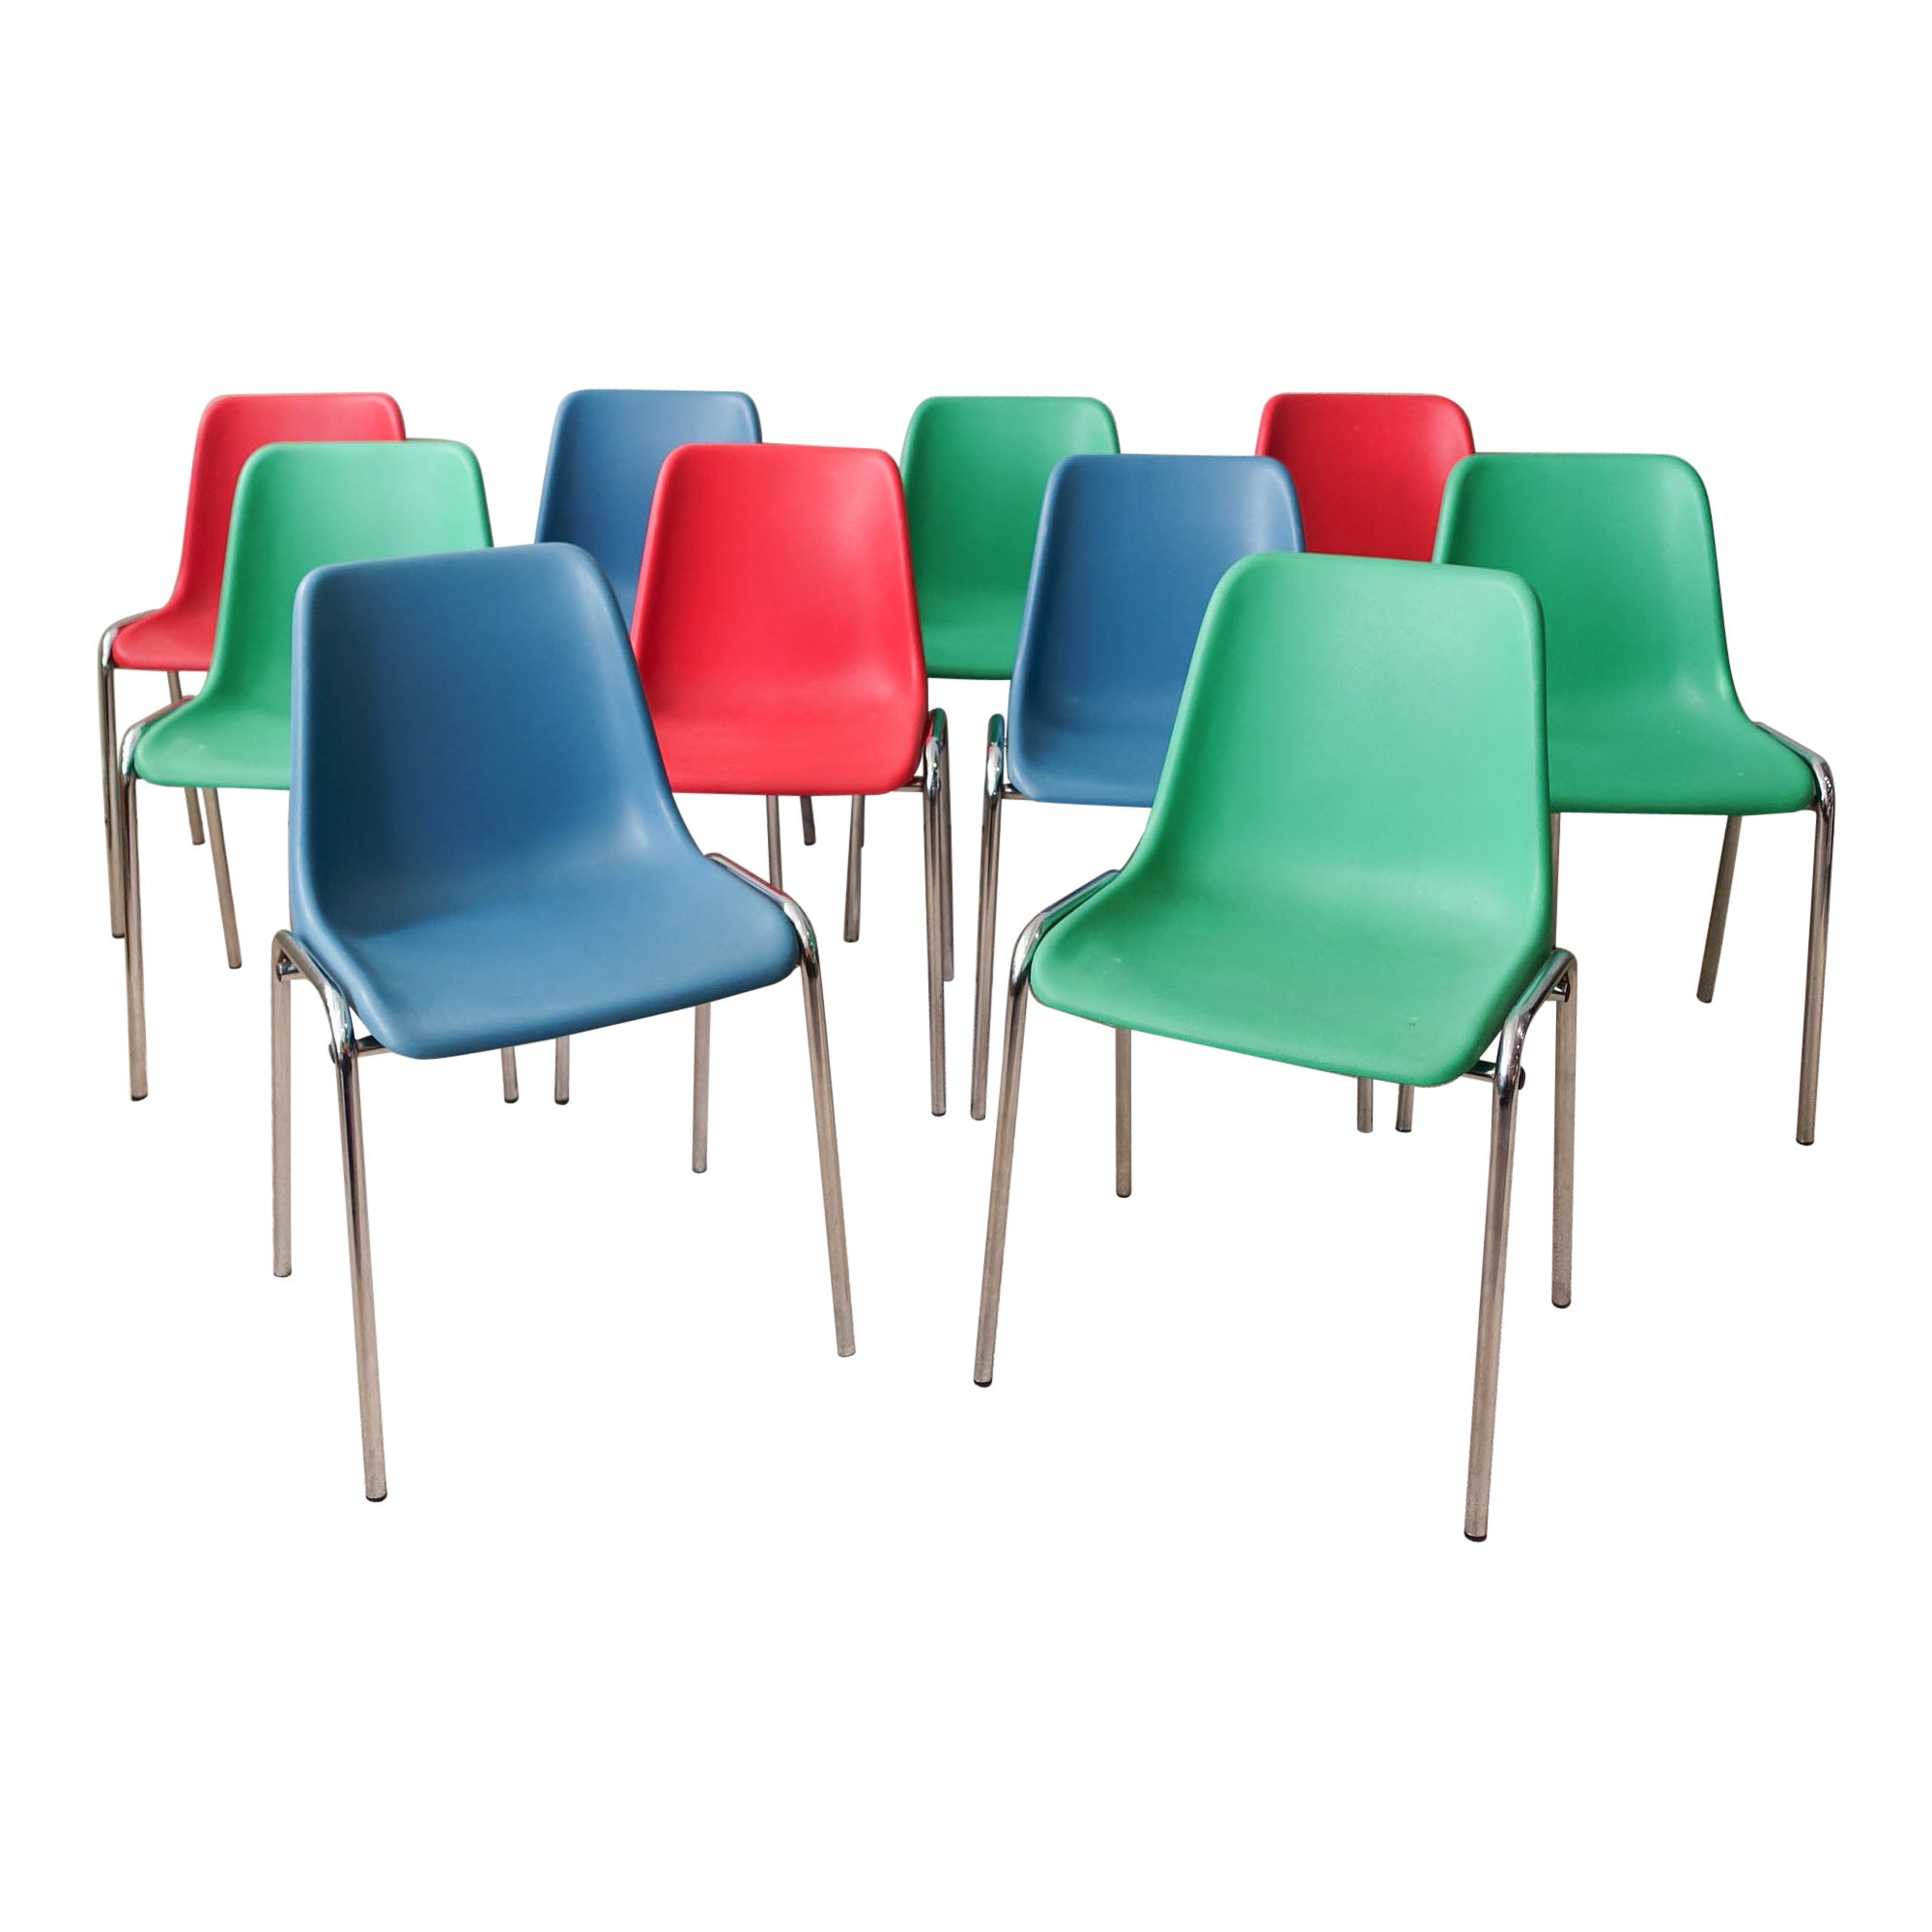 Set of 10 Multicolored Stackable Chairs in the Style of Helmut Starke, 1970s For Sale